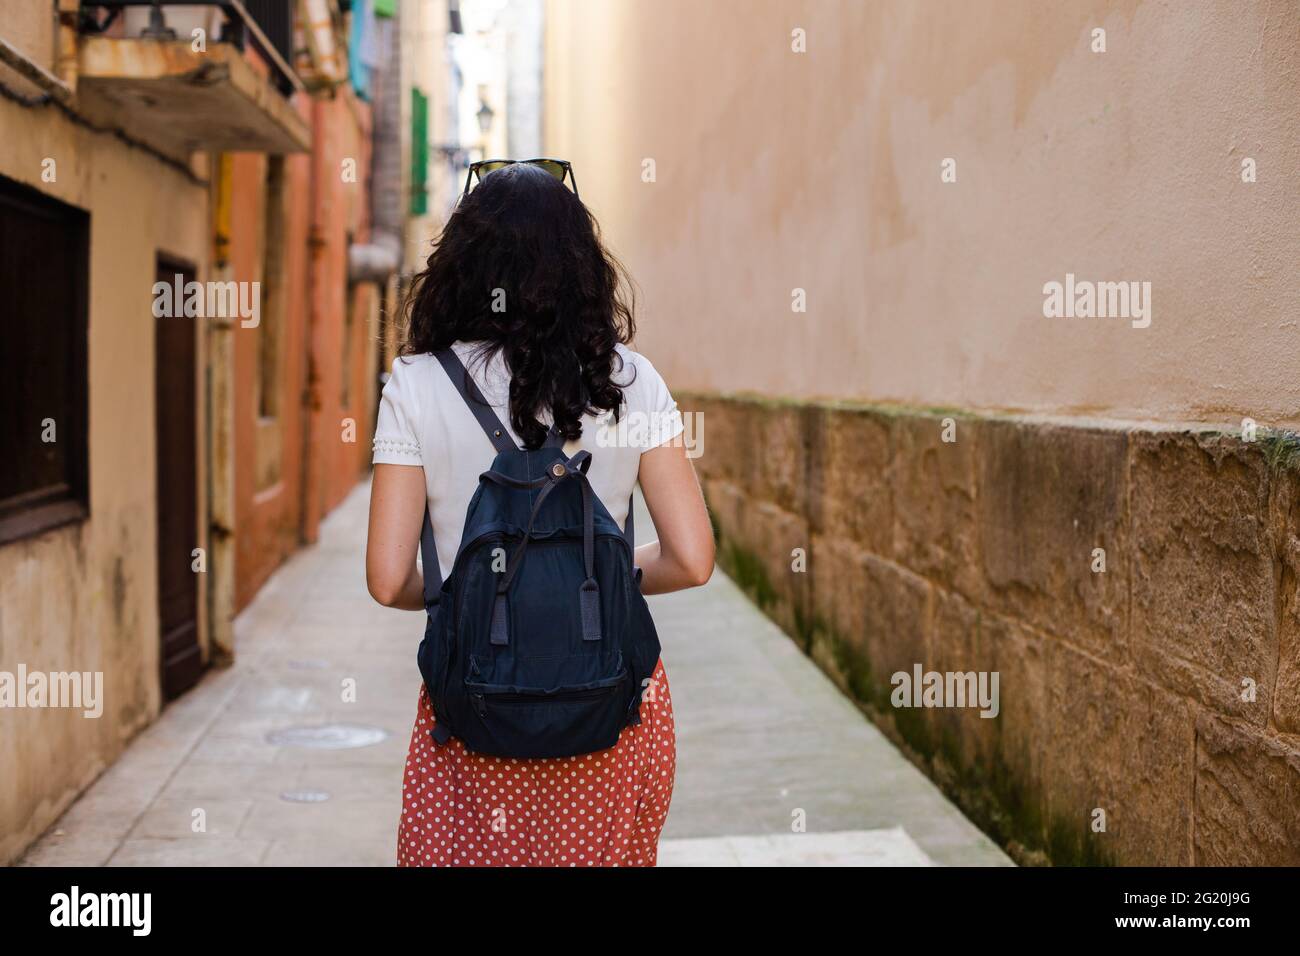 Rear view of a young woman with a backpack walking down a lonely city alley alone. Sense of danger Stock Photo